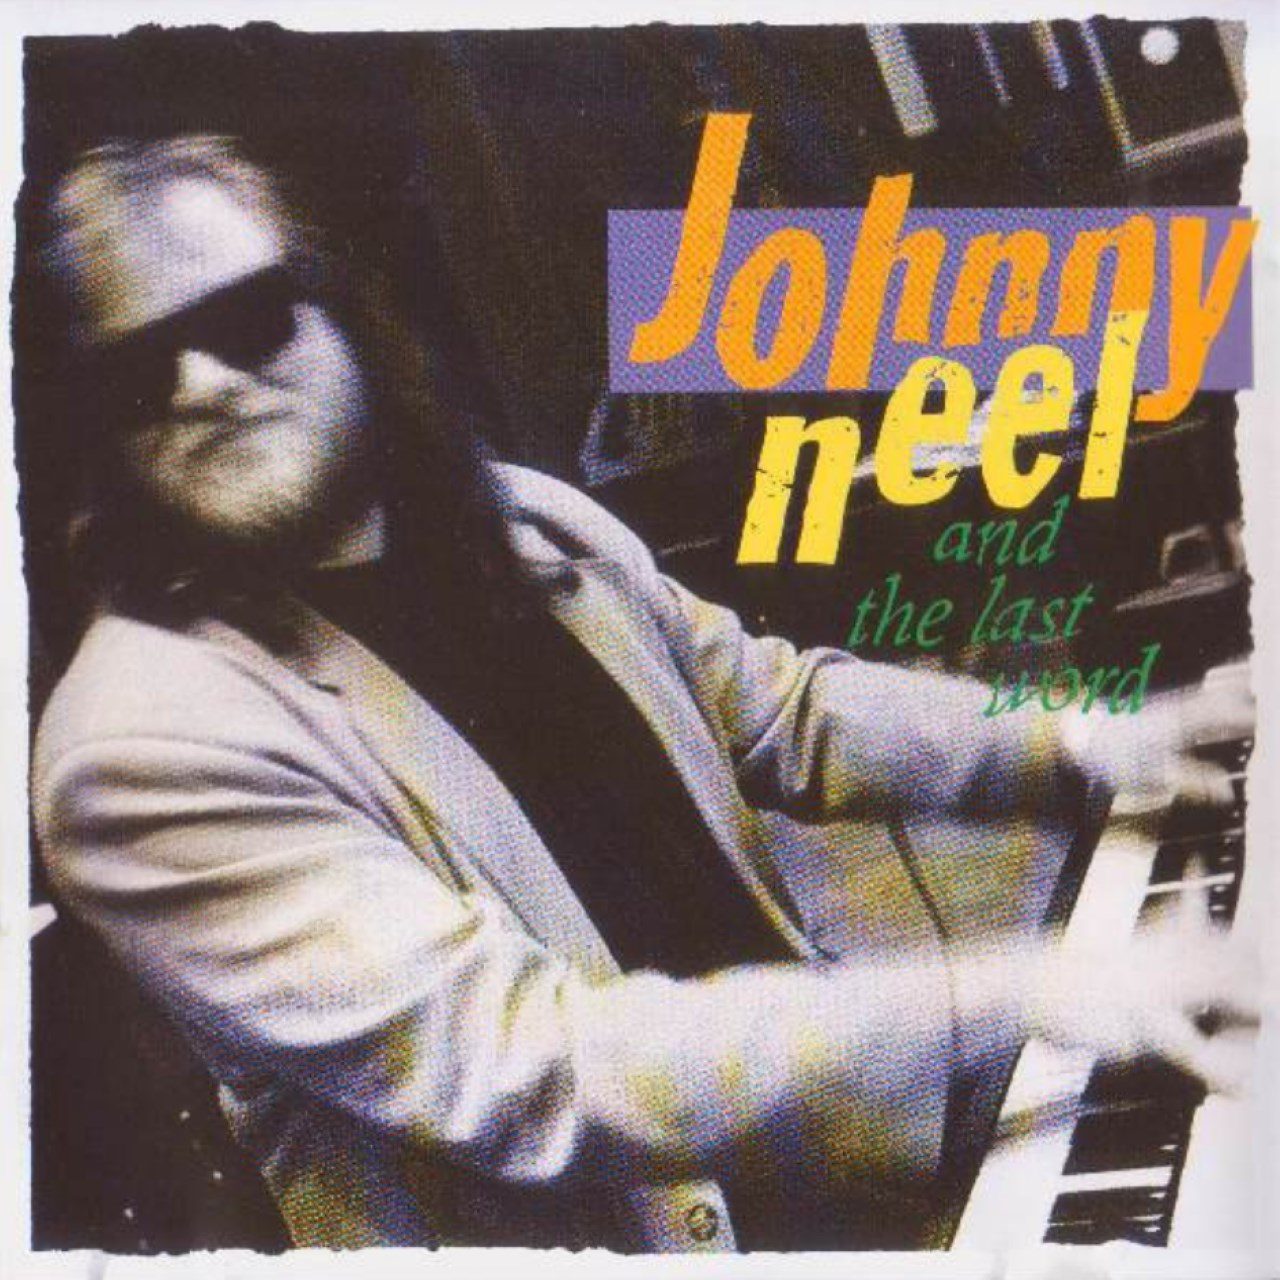 Johnny Neel And The Last Word – Johnny Neel And The Last Word cover album